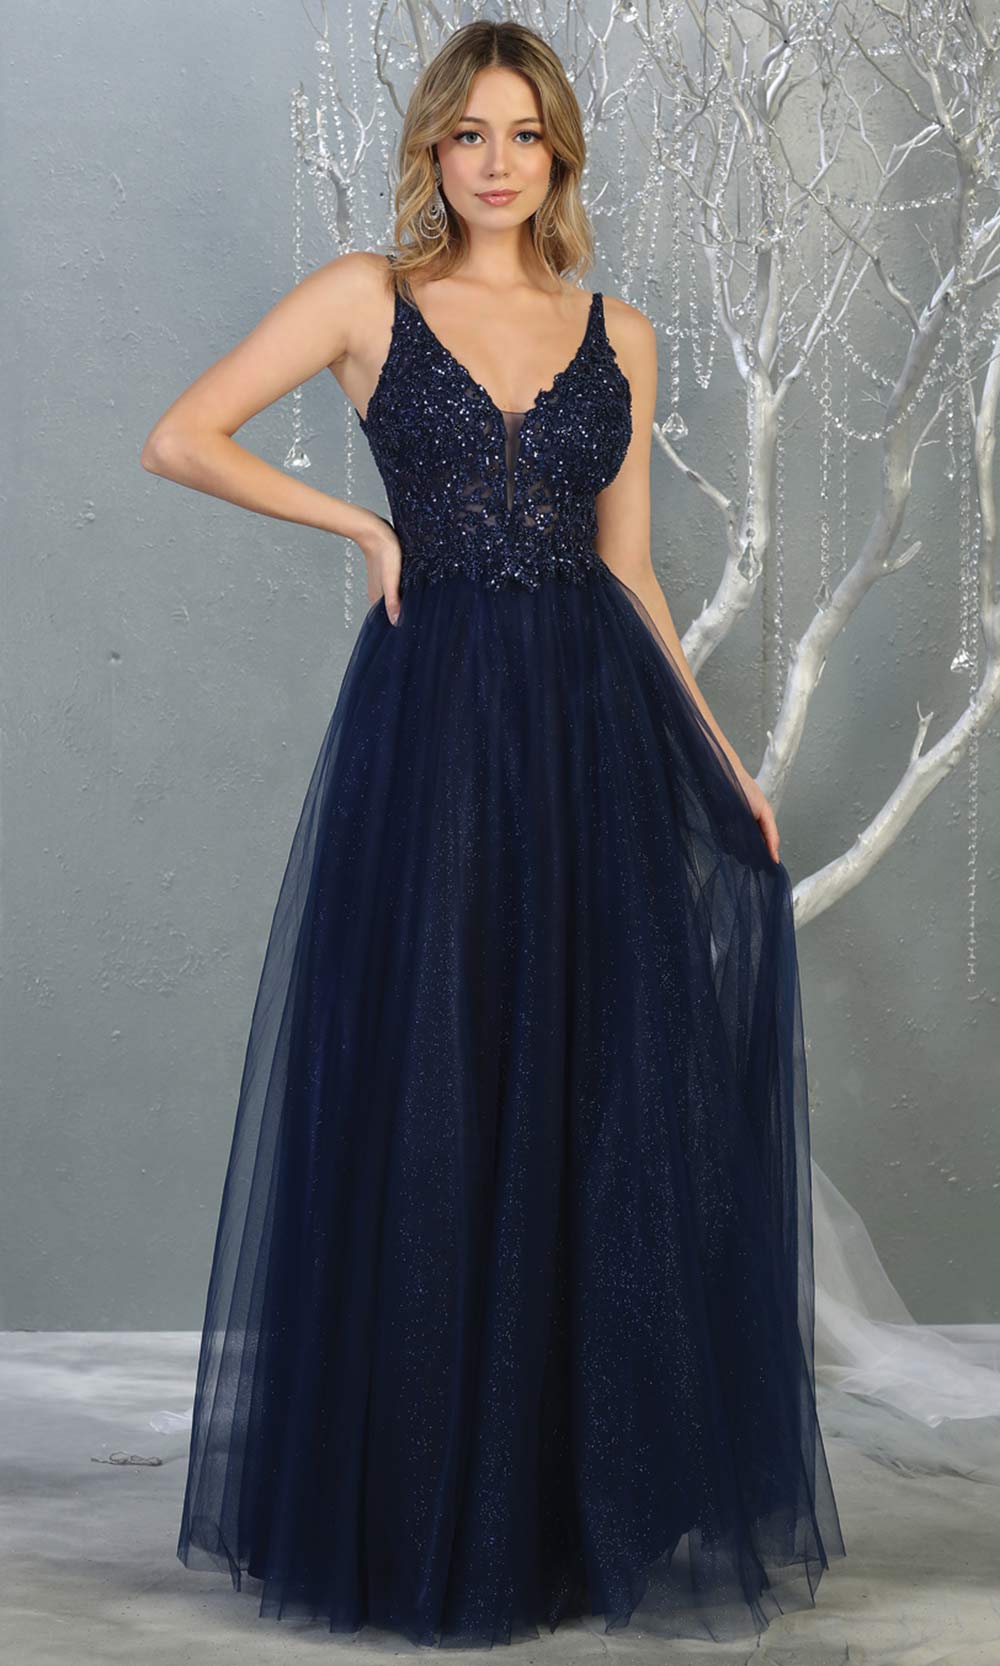 Mayqueen MQ1798 long navy blue v neck evening flowy tulle dress. Full length dark blue beaded top w/wide straps is perfect for  enagagement/e-shoot dress, formal wedding guest, indowestern gown, evening party dress, prom, bridesmaid. Plus sizes avail.jpg